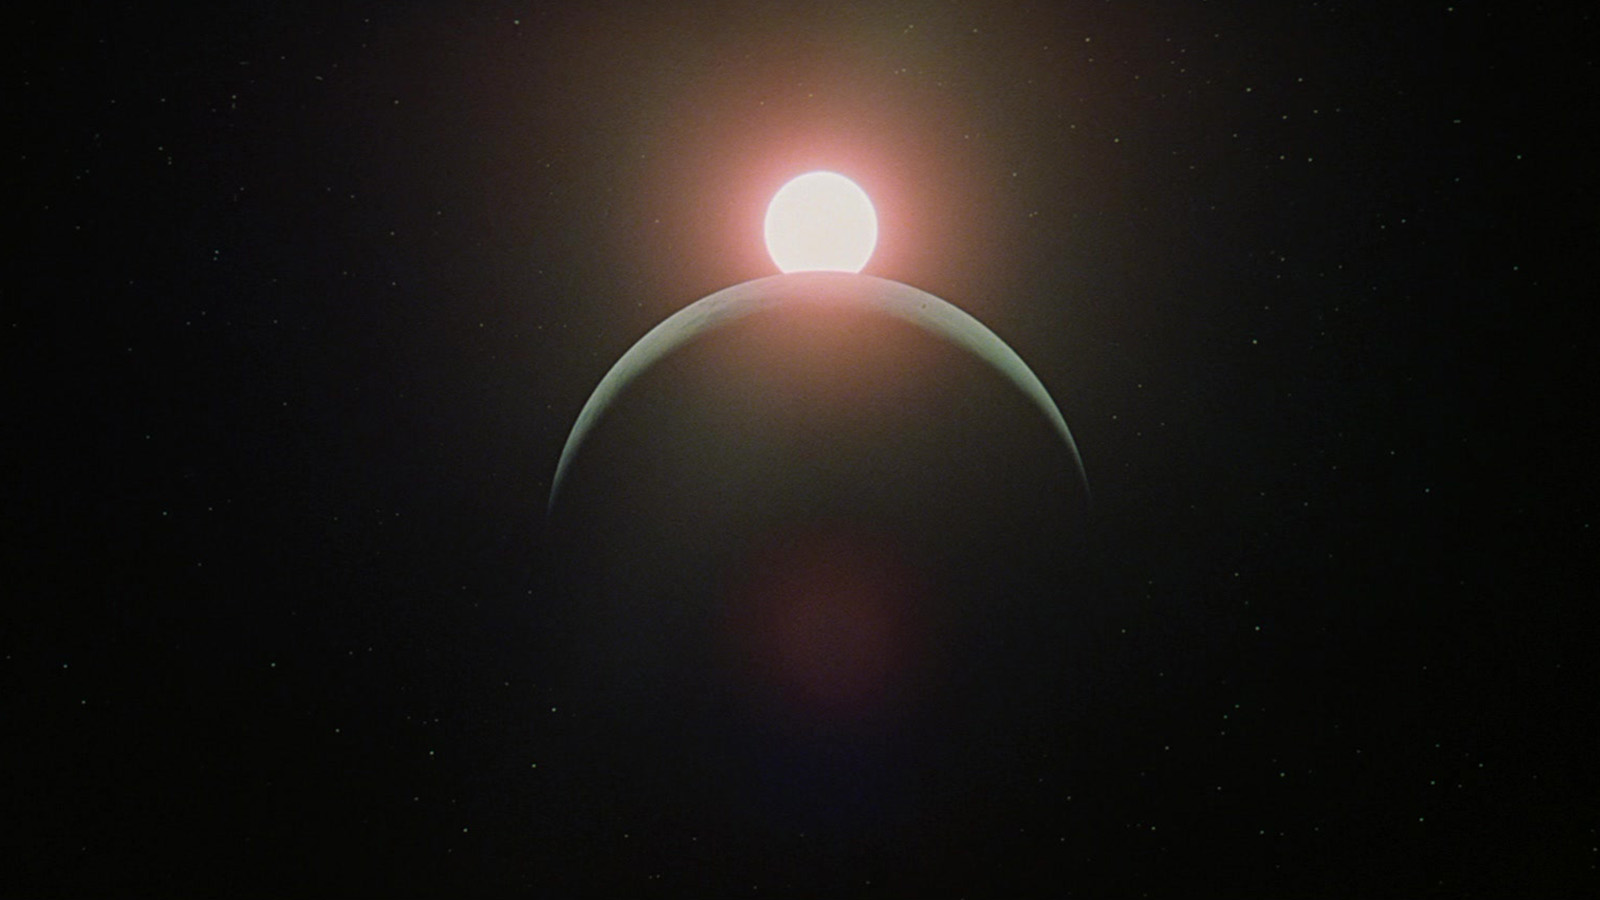 film still from 2001: A Space Odyssey (1968)